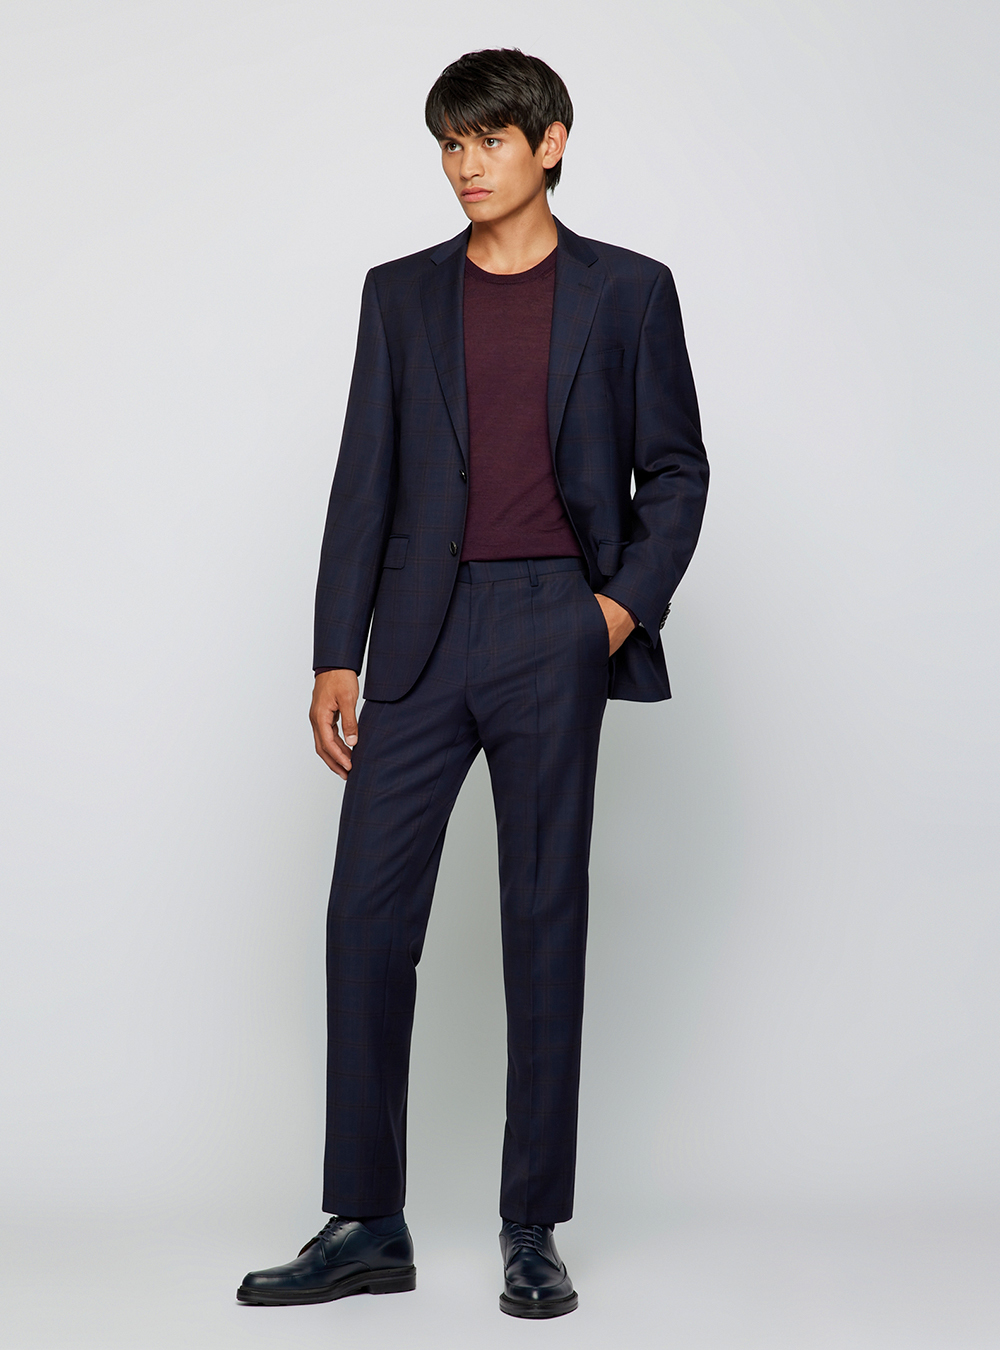 navy suit, burgundy crew-neck sweater, and black derby shoes